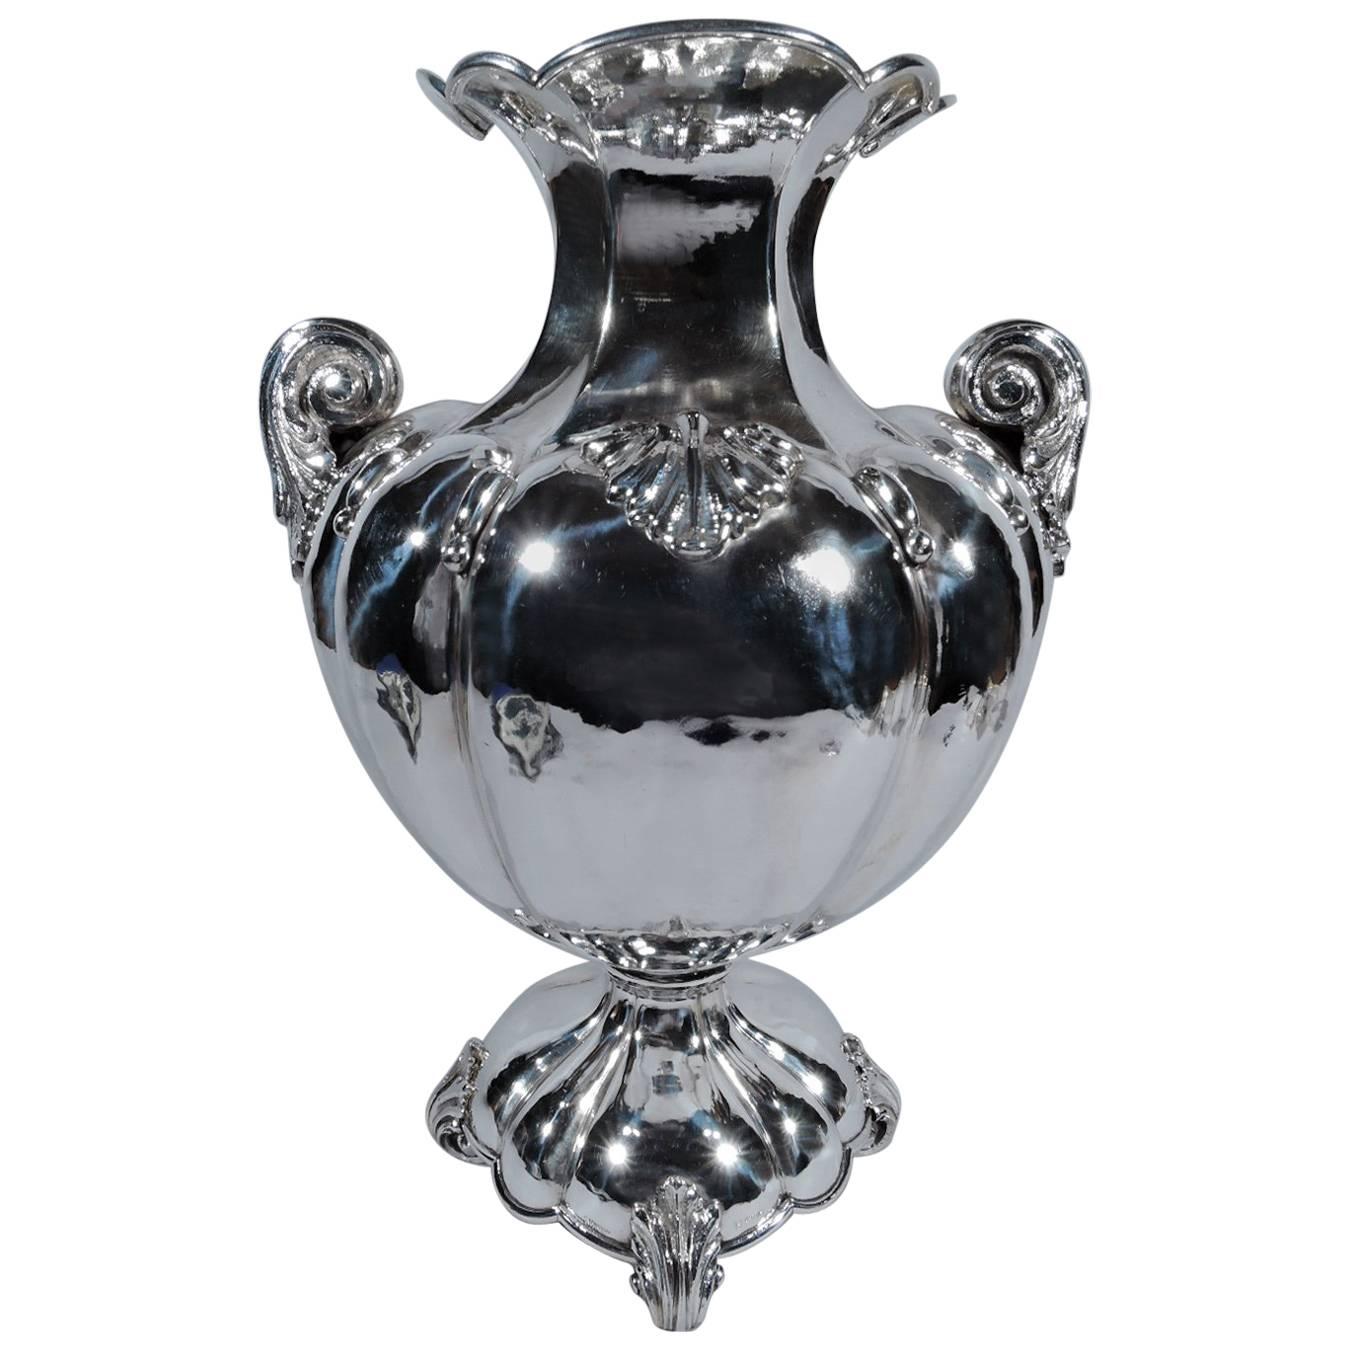 Large Italian Hand-Hammered Silver Classical Amphora Vase